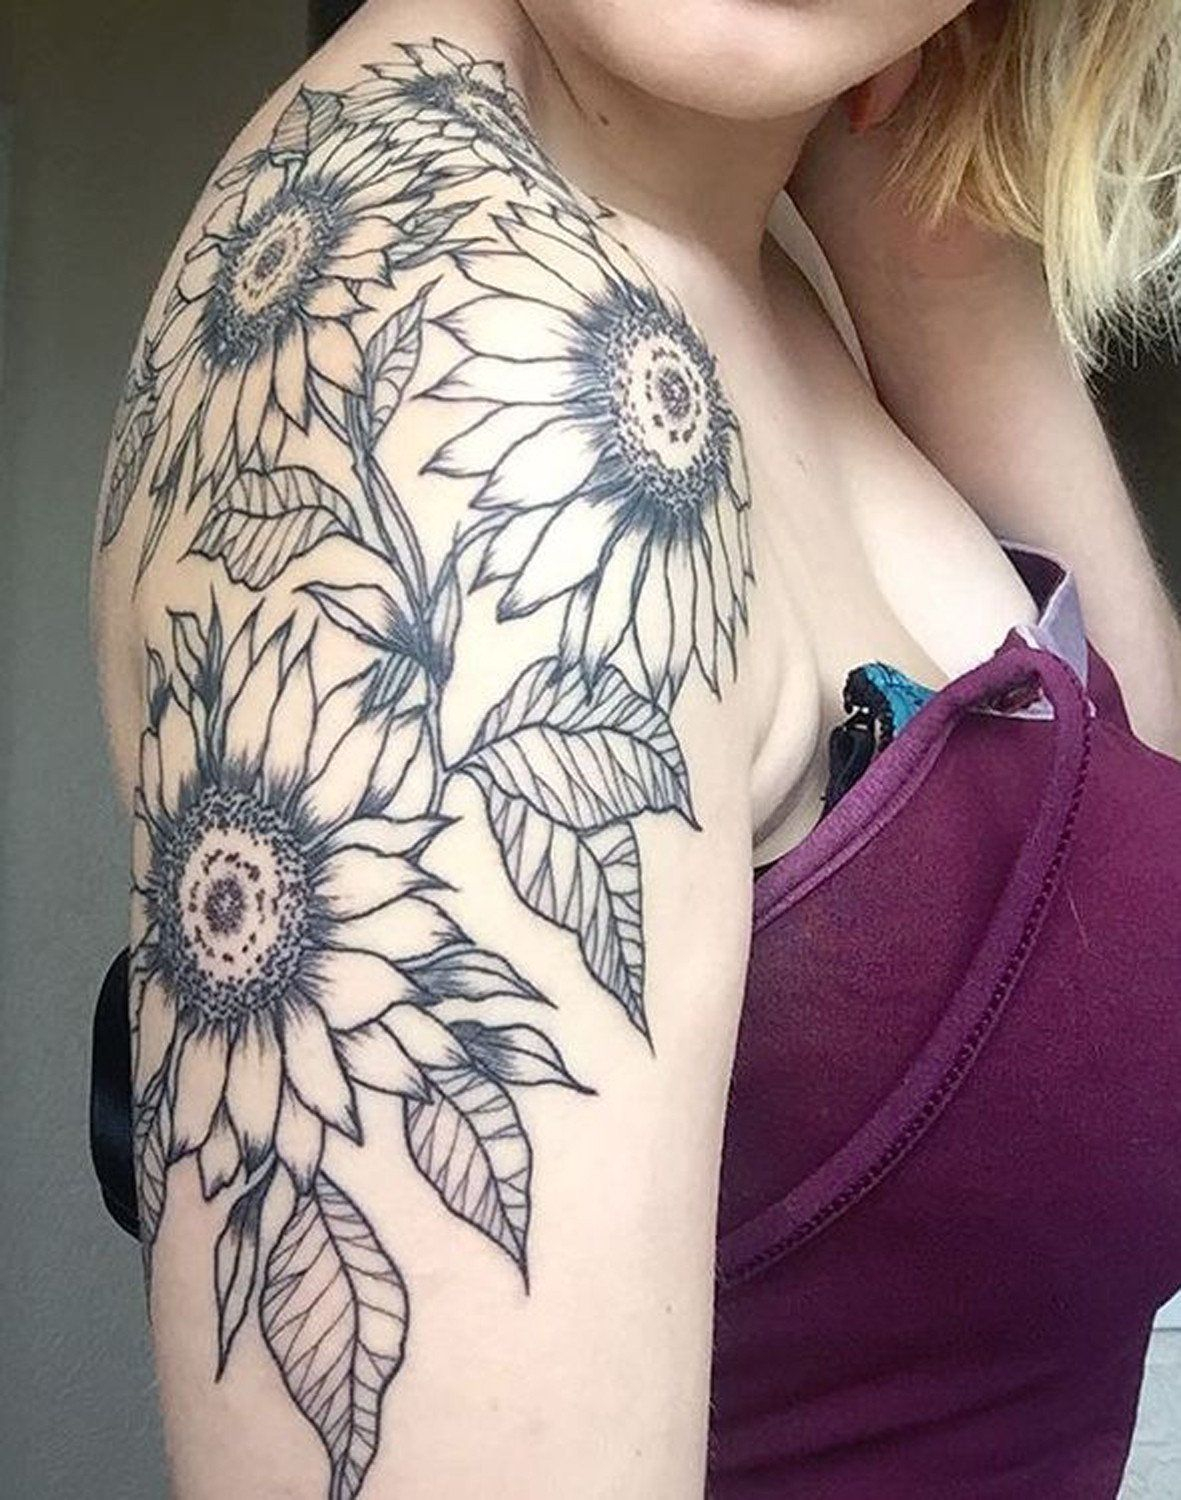 Full Arm Sleeve Sunflower Floral Tattoo Ideas On Shoulder For Women inside sizing 1181 X 1500